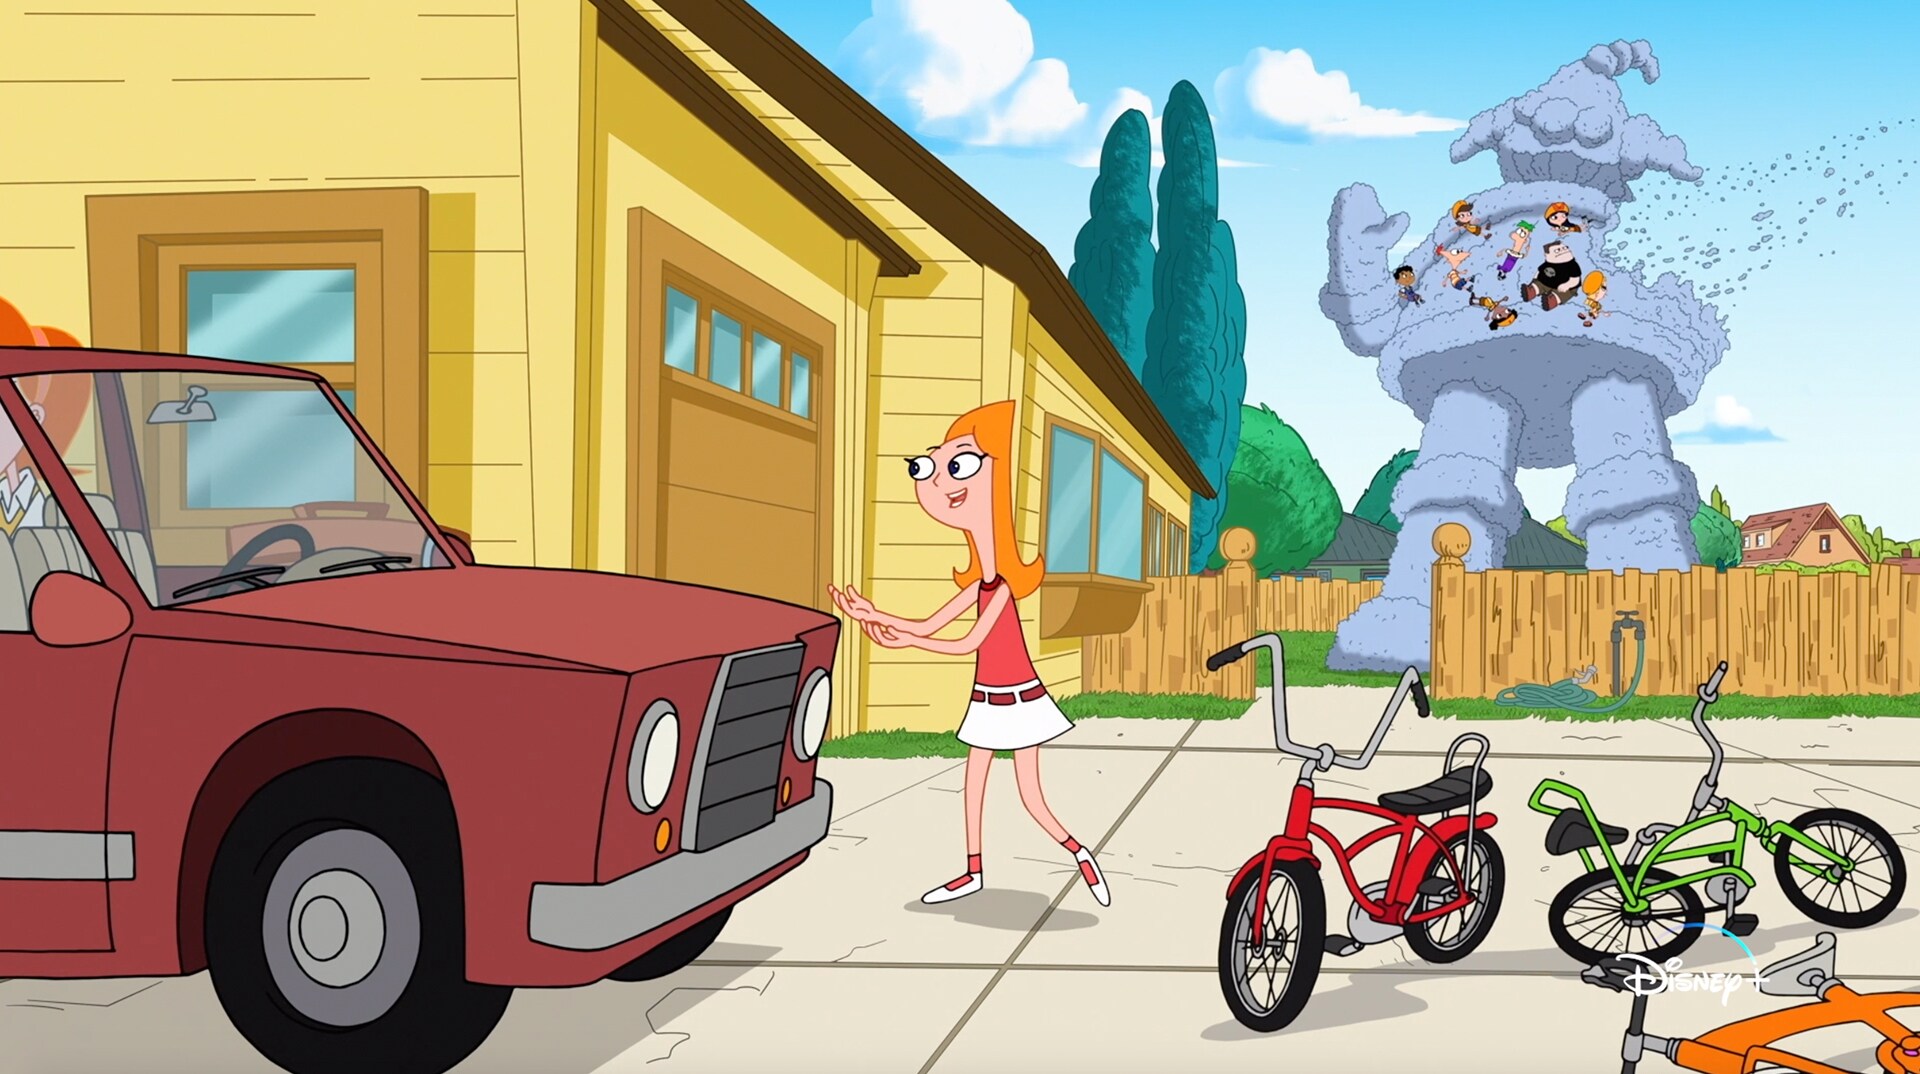 Official Clip | Phineas and Ferb The Movie: Candace Against the Universe | Disney+